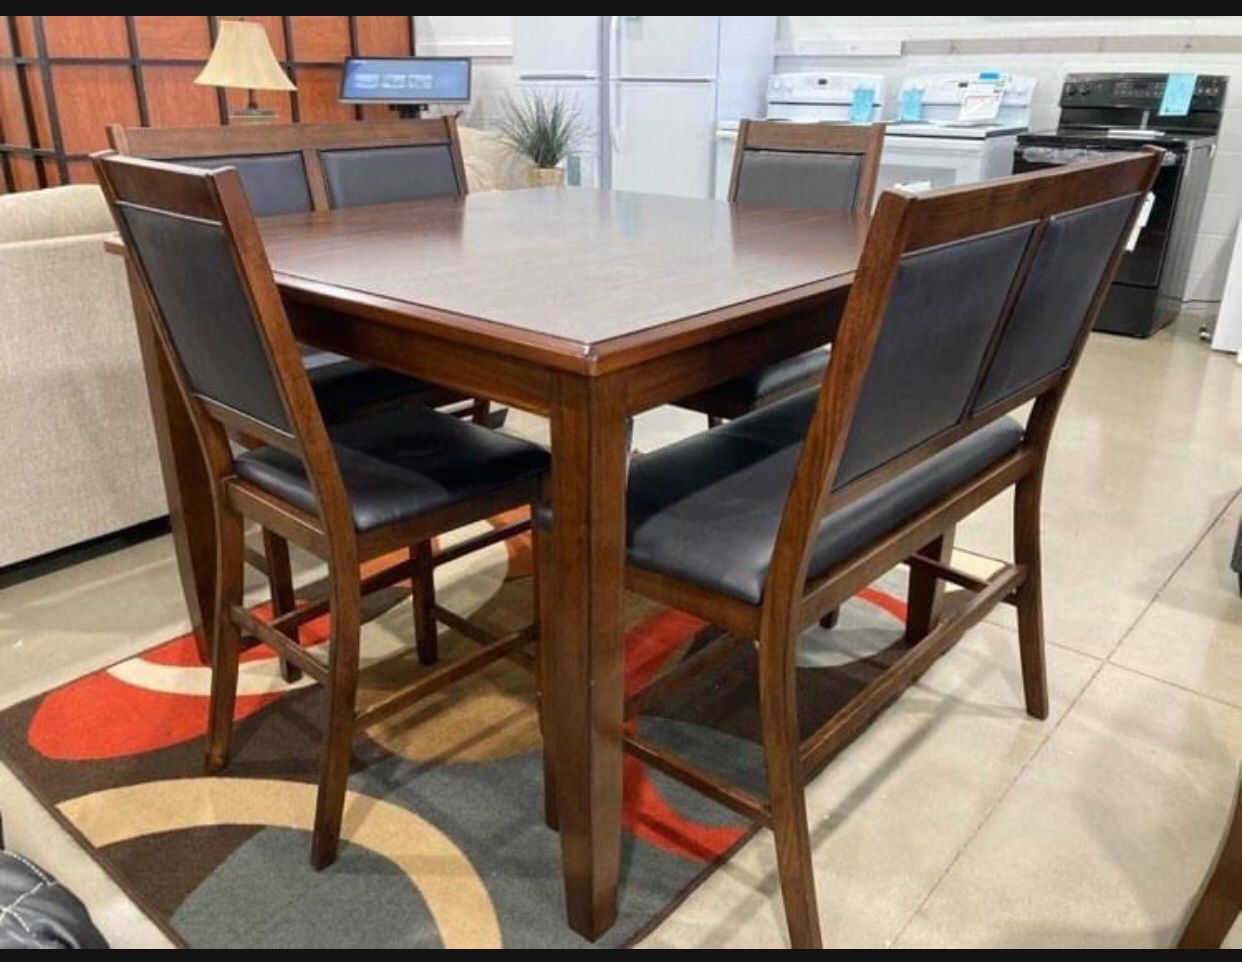 Black/ Brown Counter Height Kitchen Table and Bar Stools ✅ In Stock ➡️ Available Delivery 🚚 